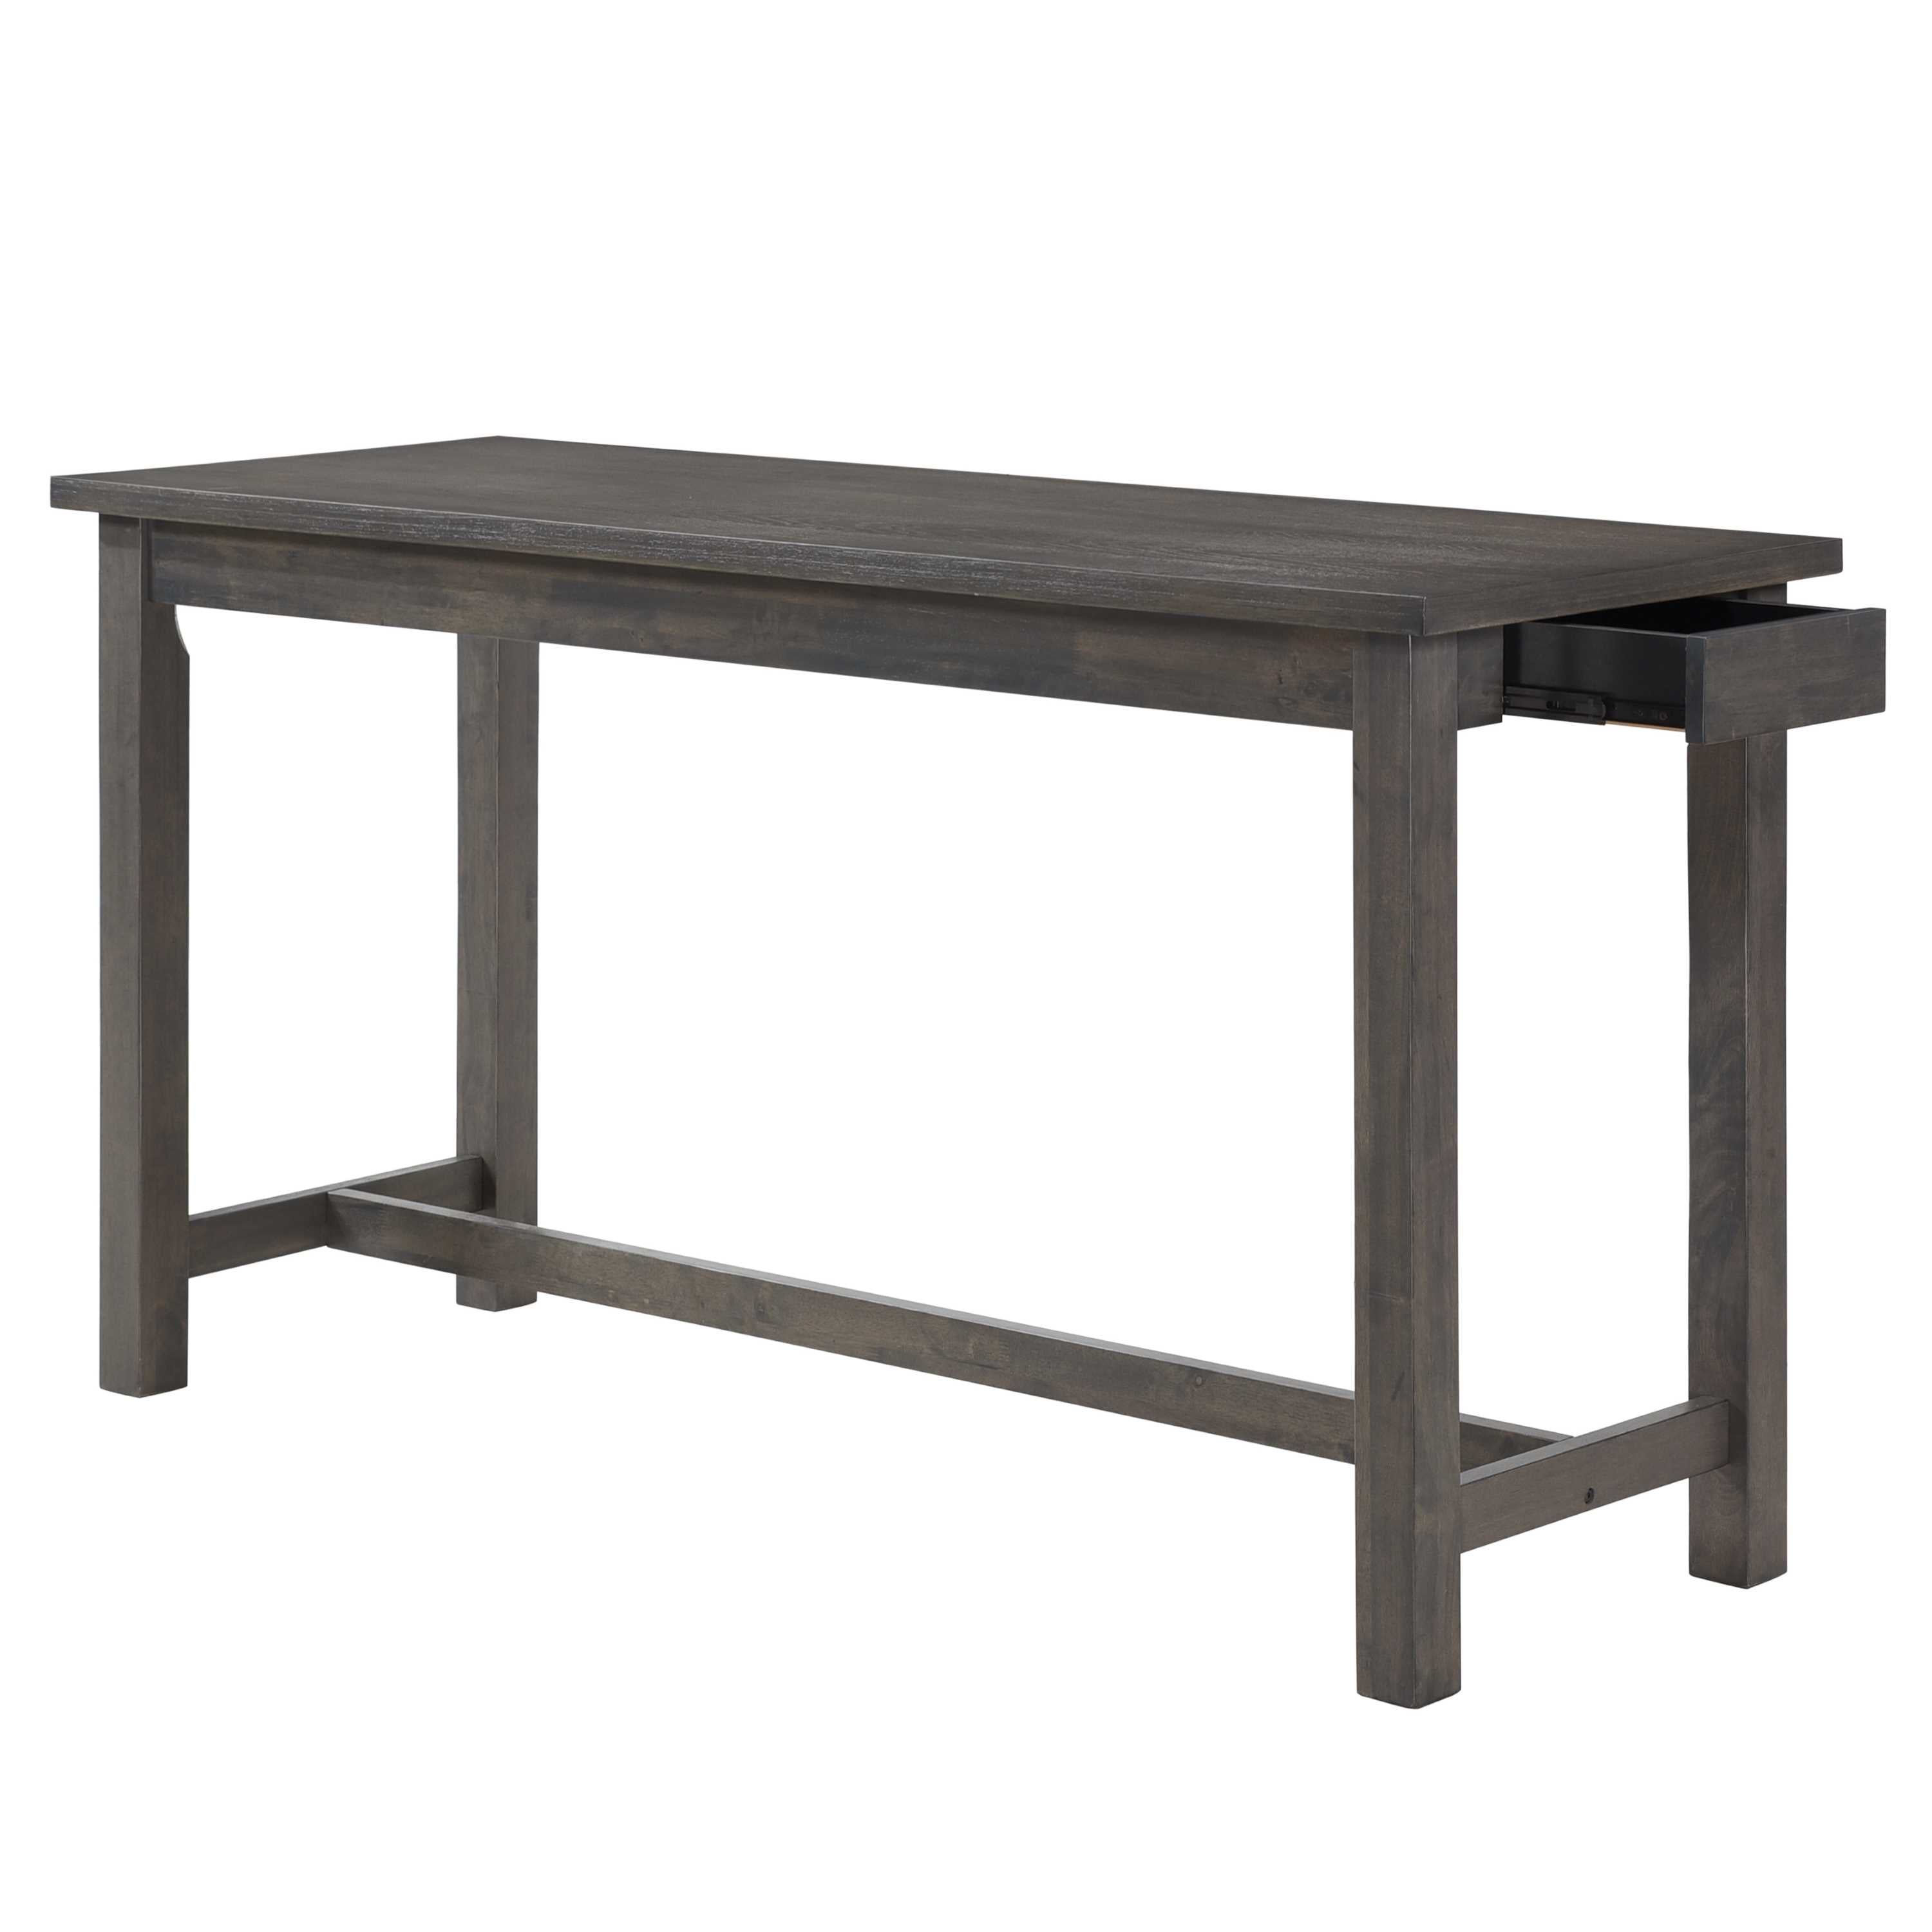 Connected Dining Set Grey 5713GY